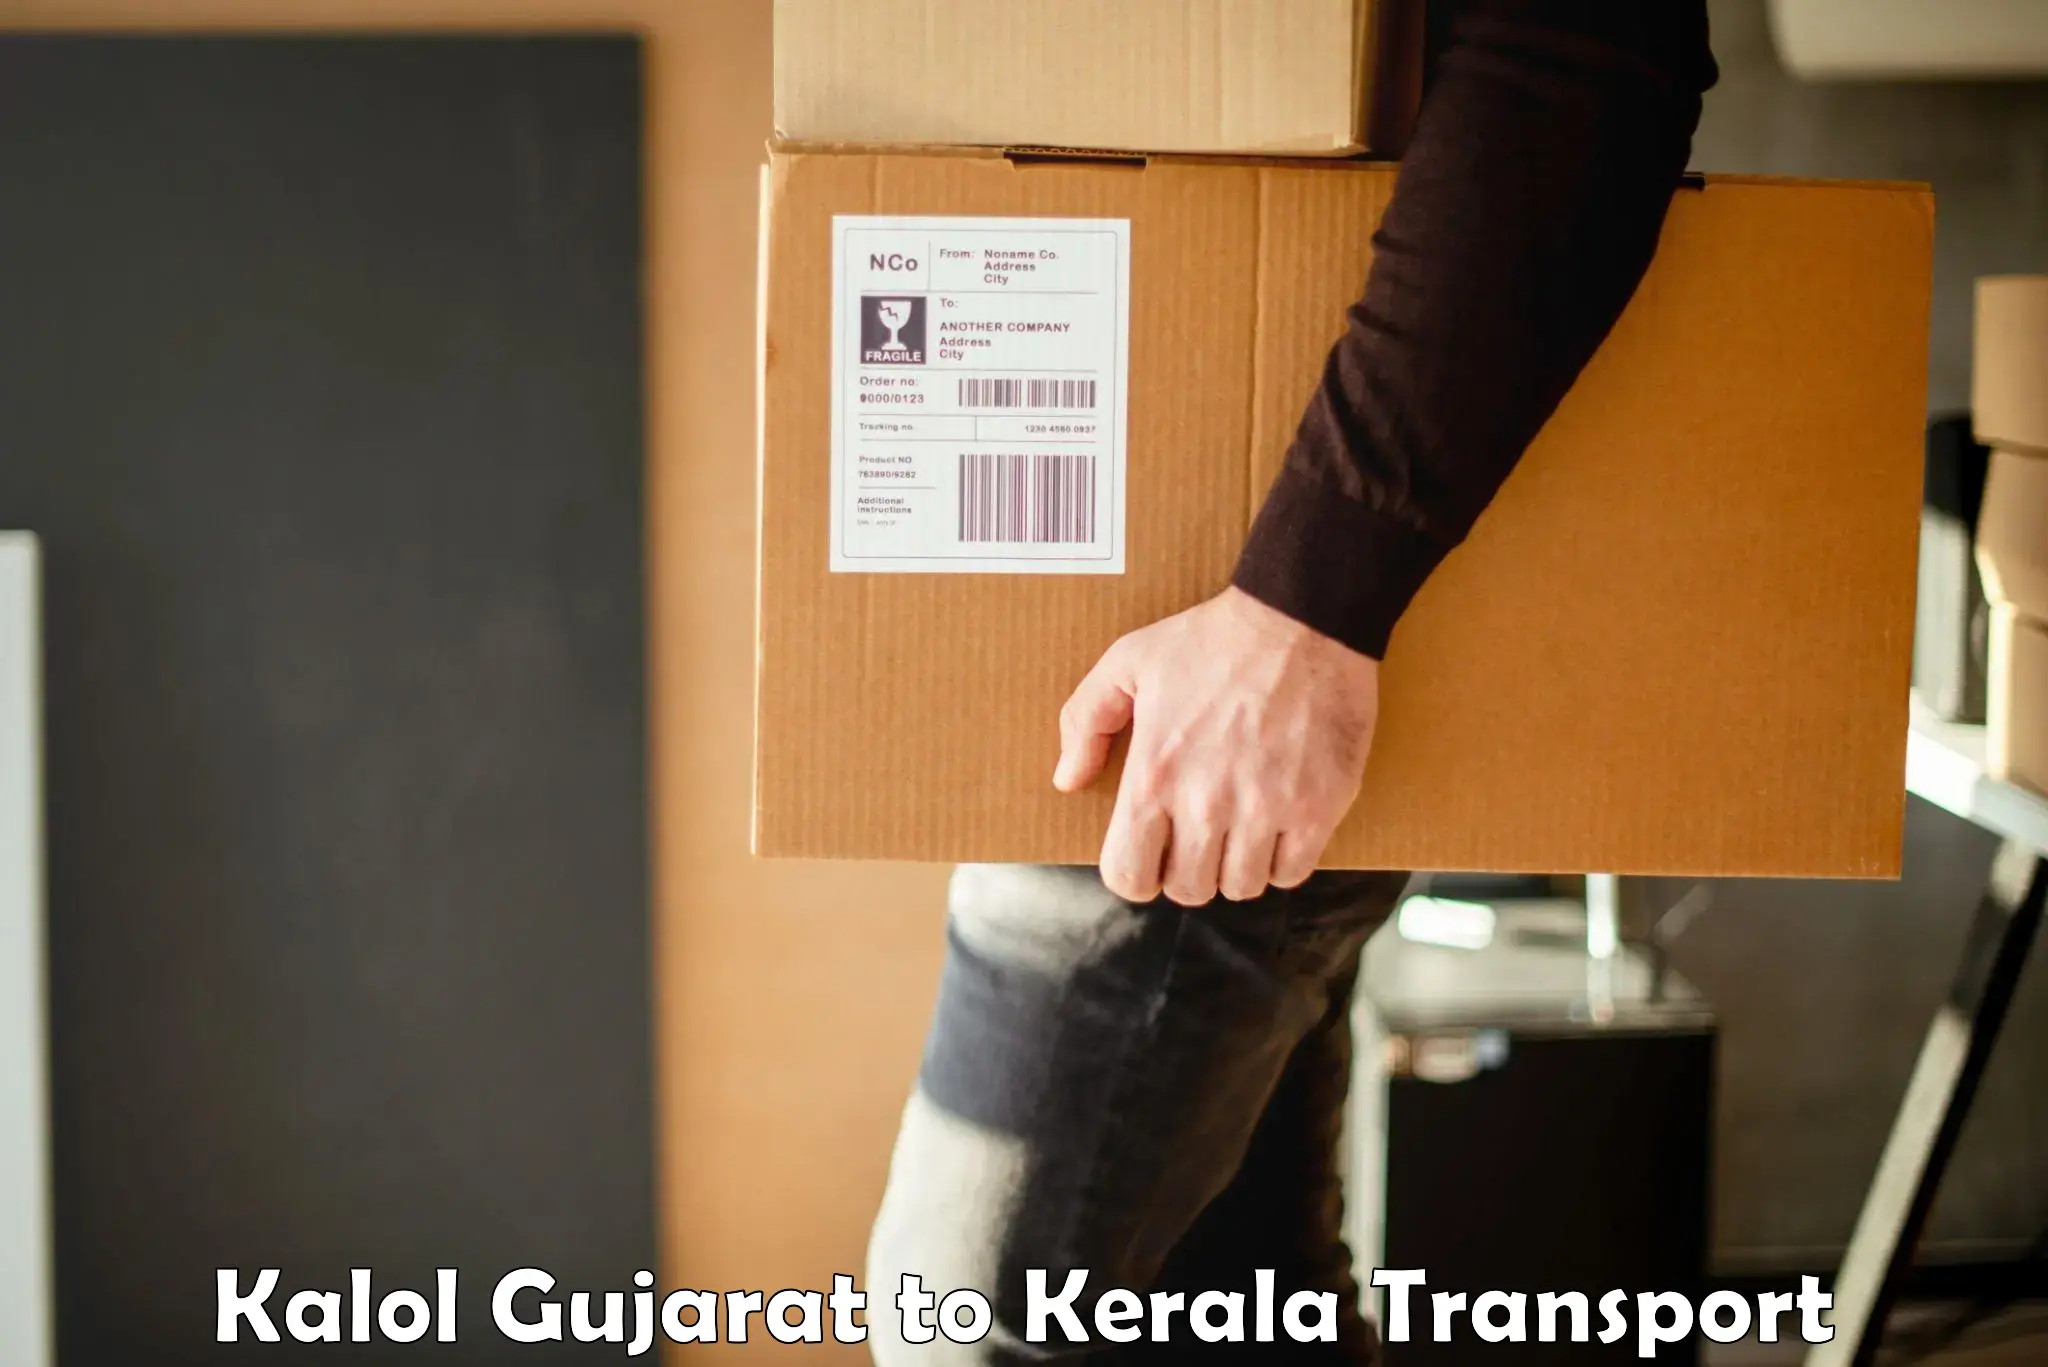 Transport bike from one state to another Kalol Gujarat to Kerala